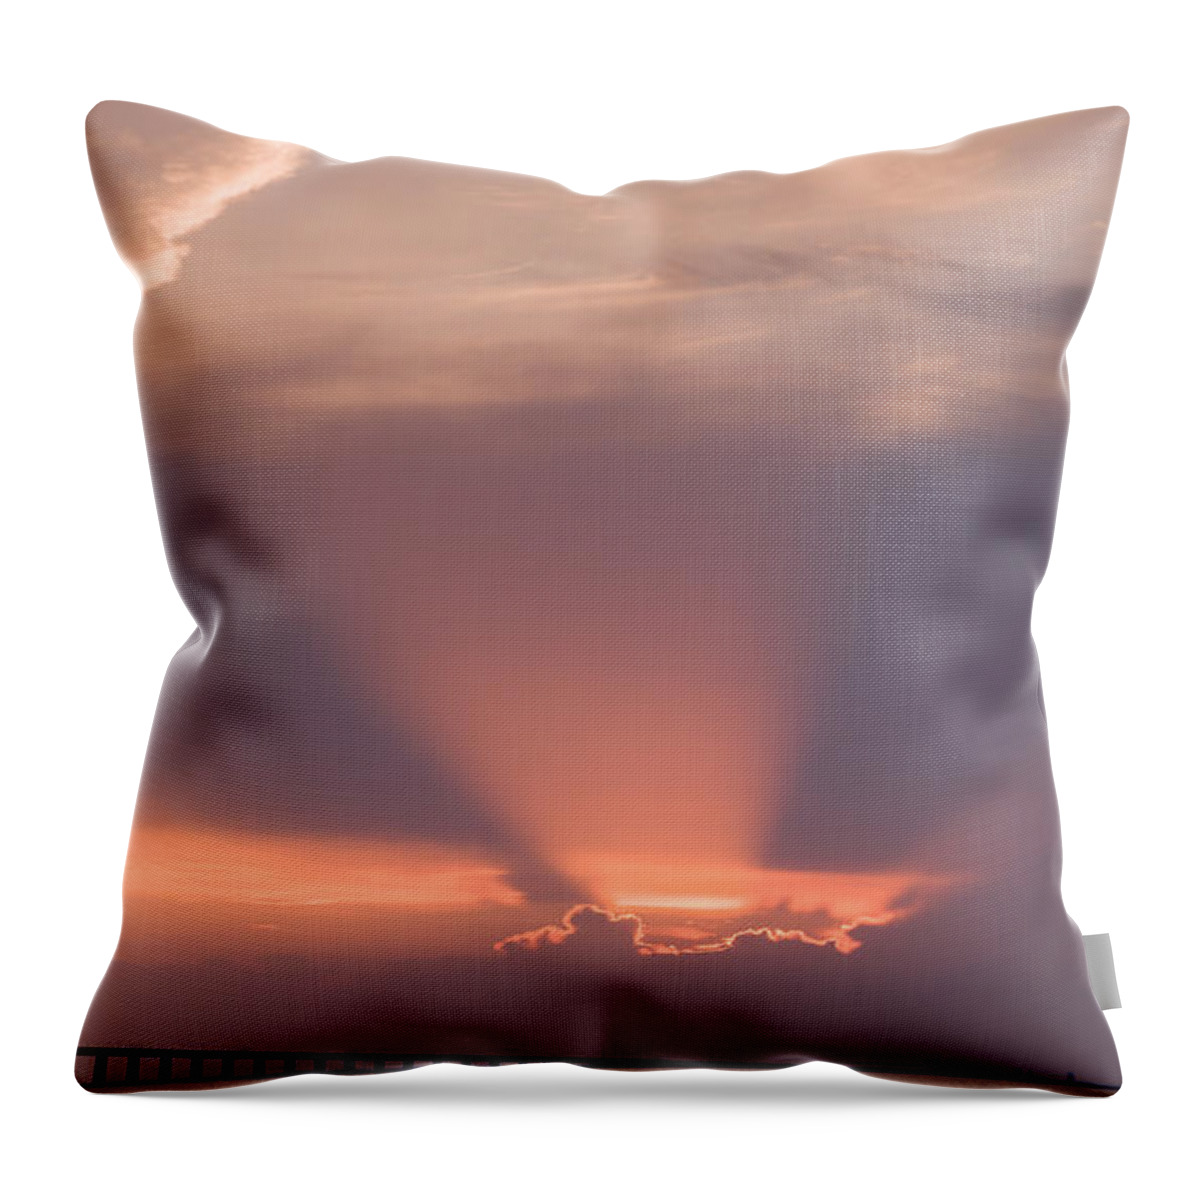 Architecture Throw Pillow featuring the photograph Pastel Heaven by Marcus Karlsson Sall